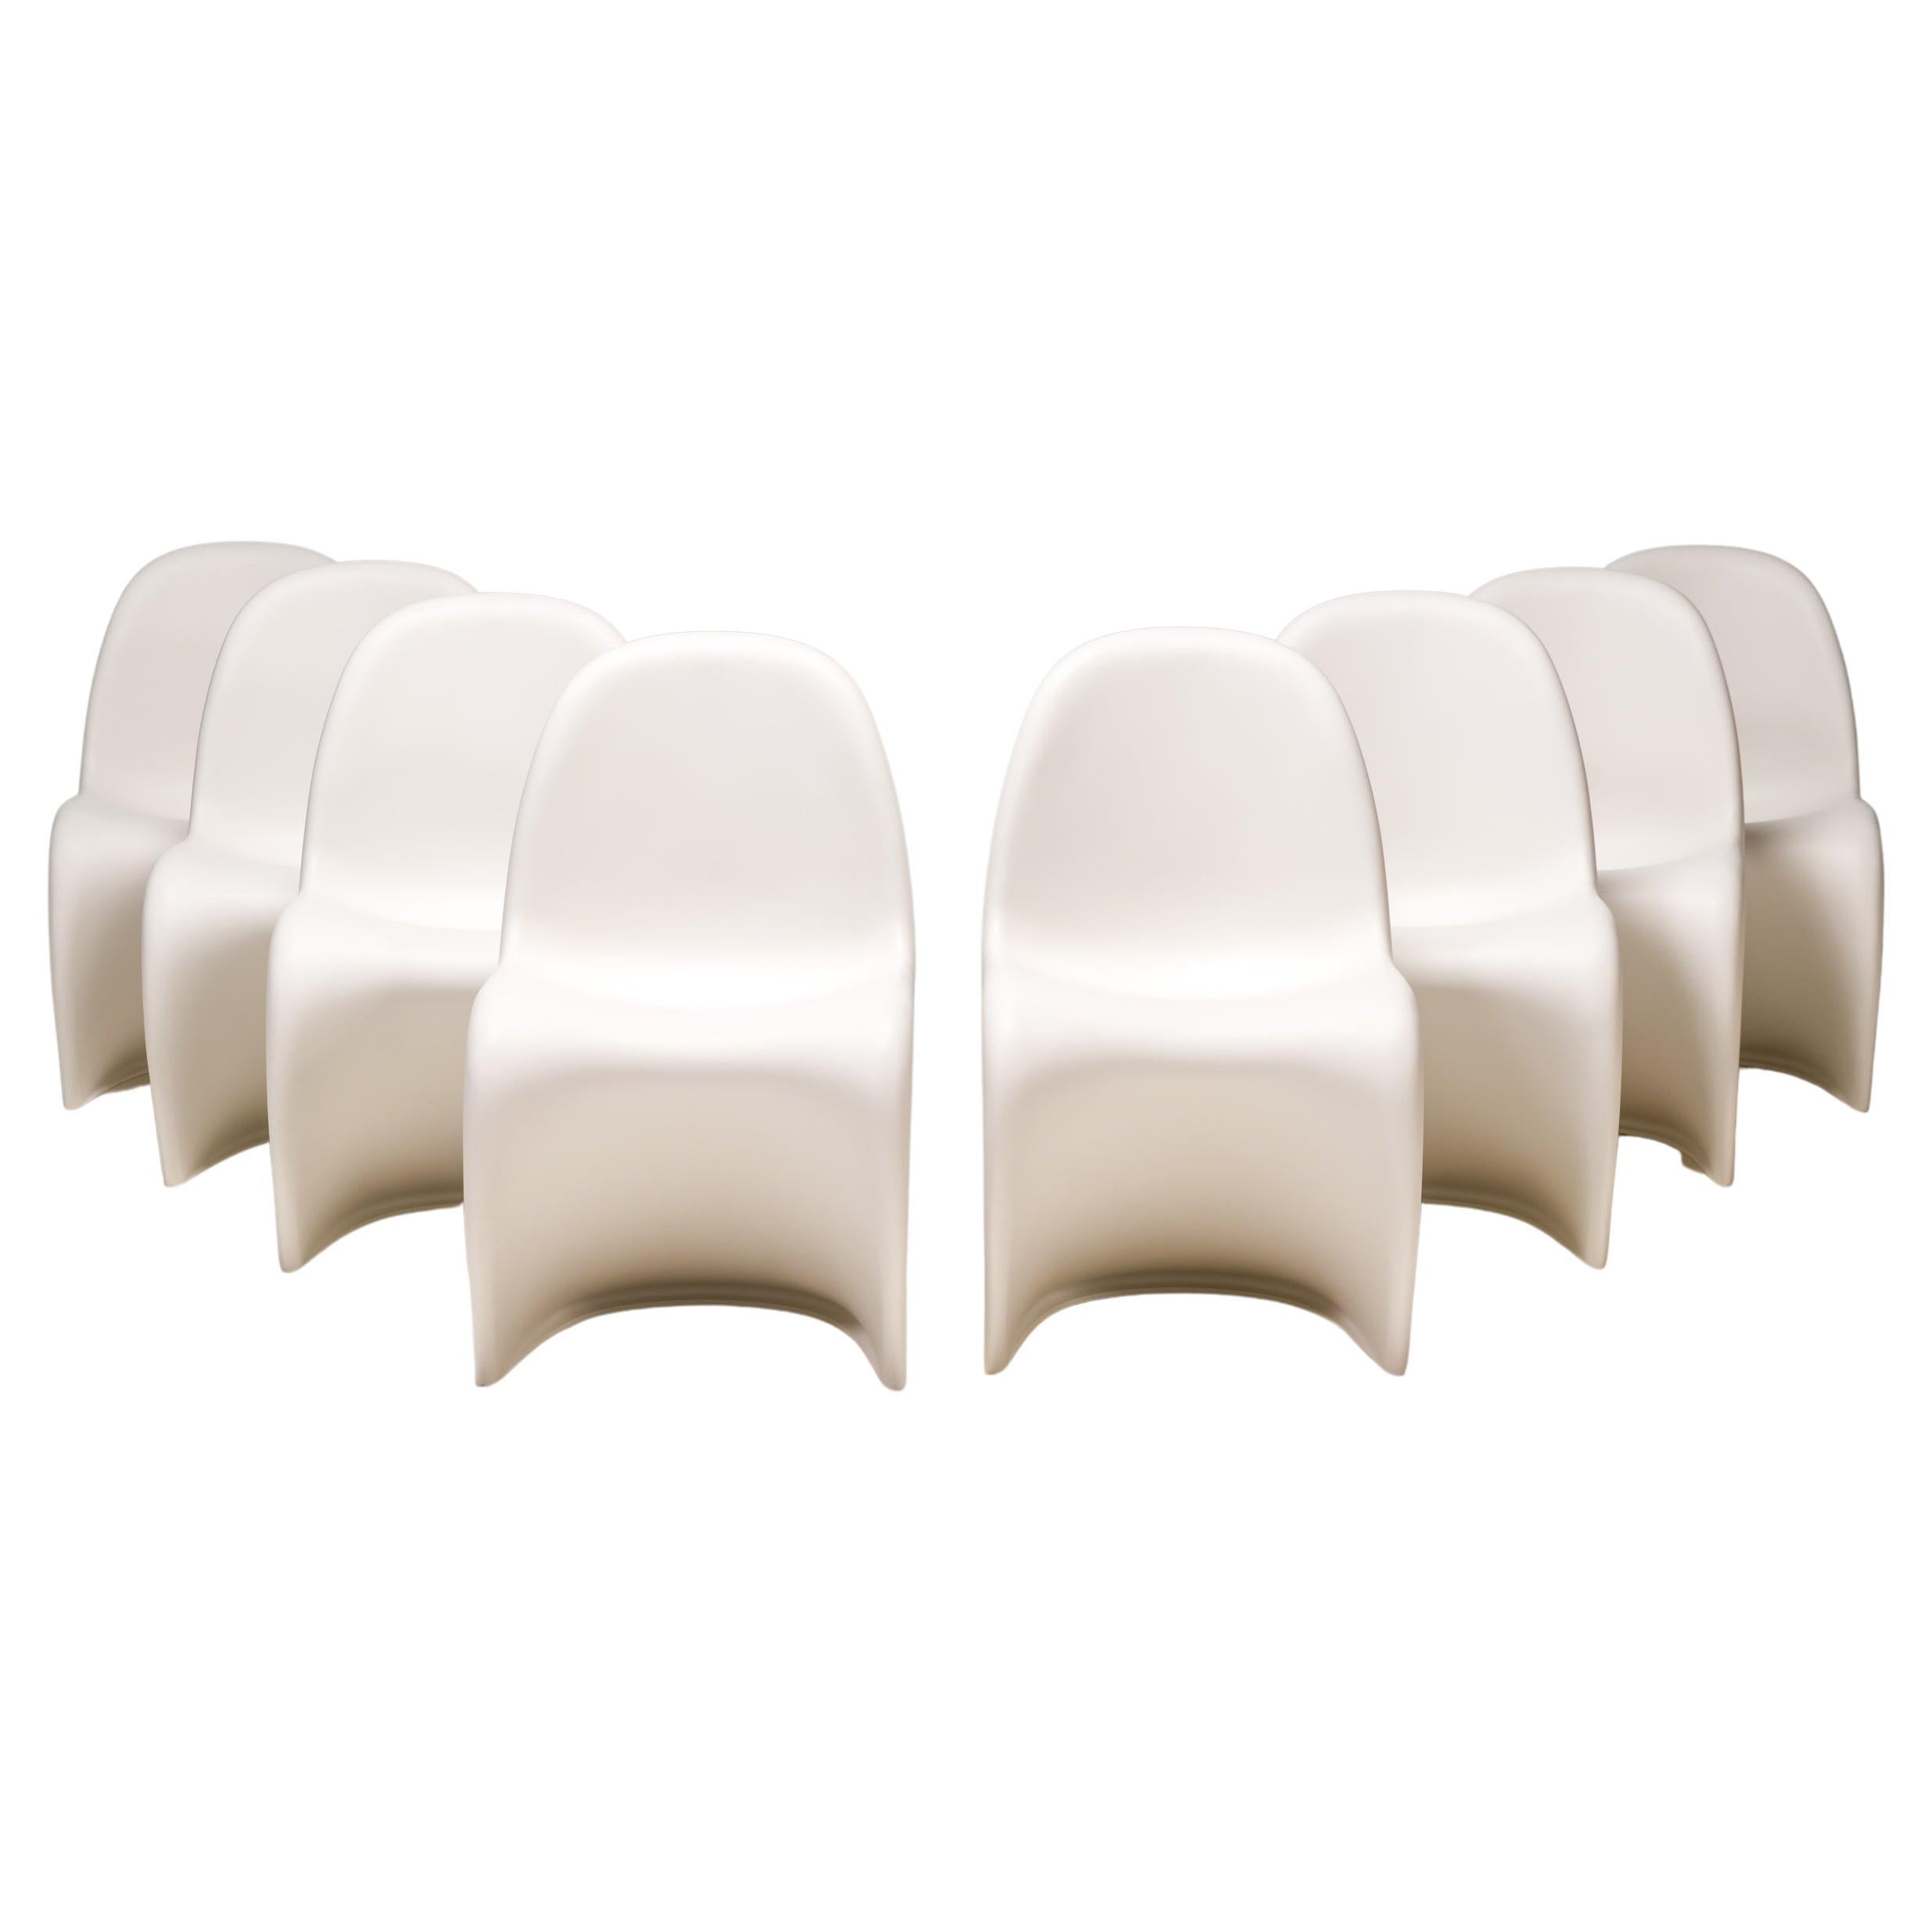 White Panton Chairs by Verner Panton for Vitra, Set of 8